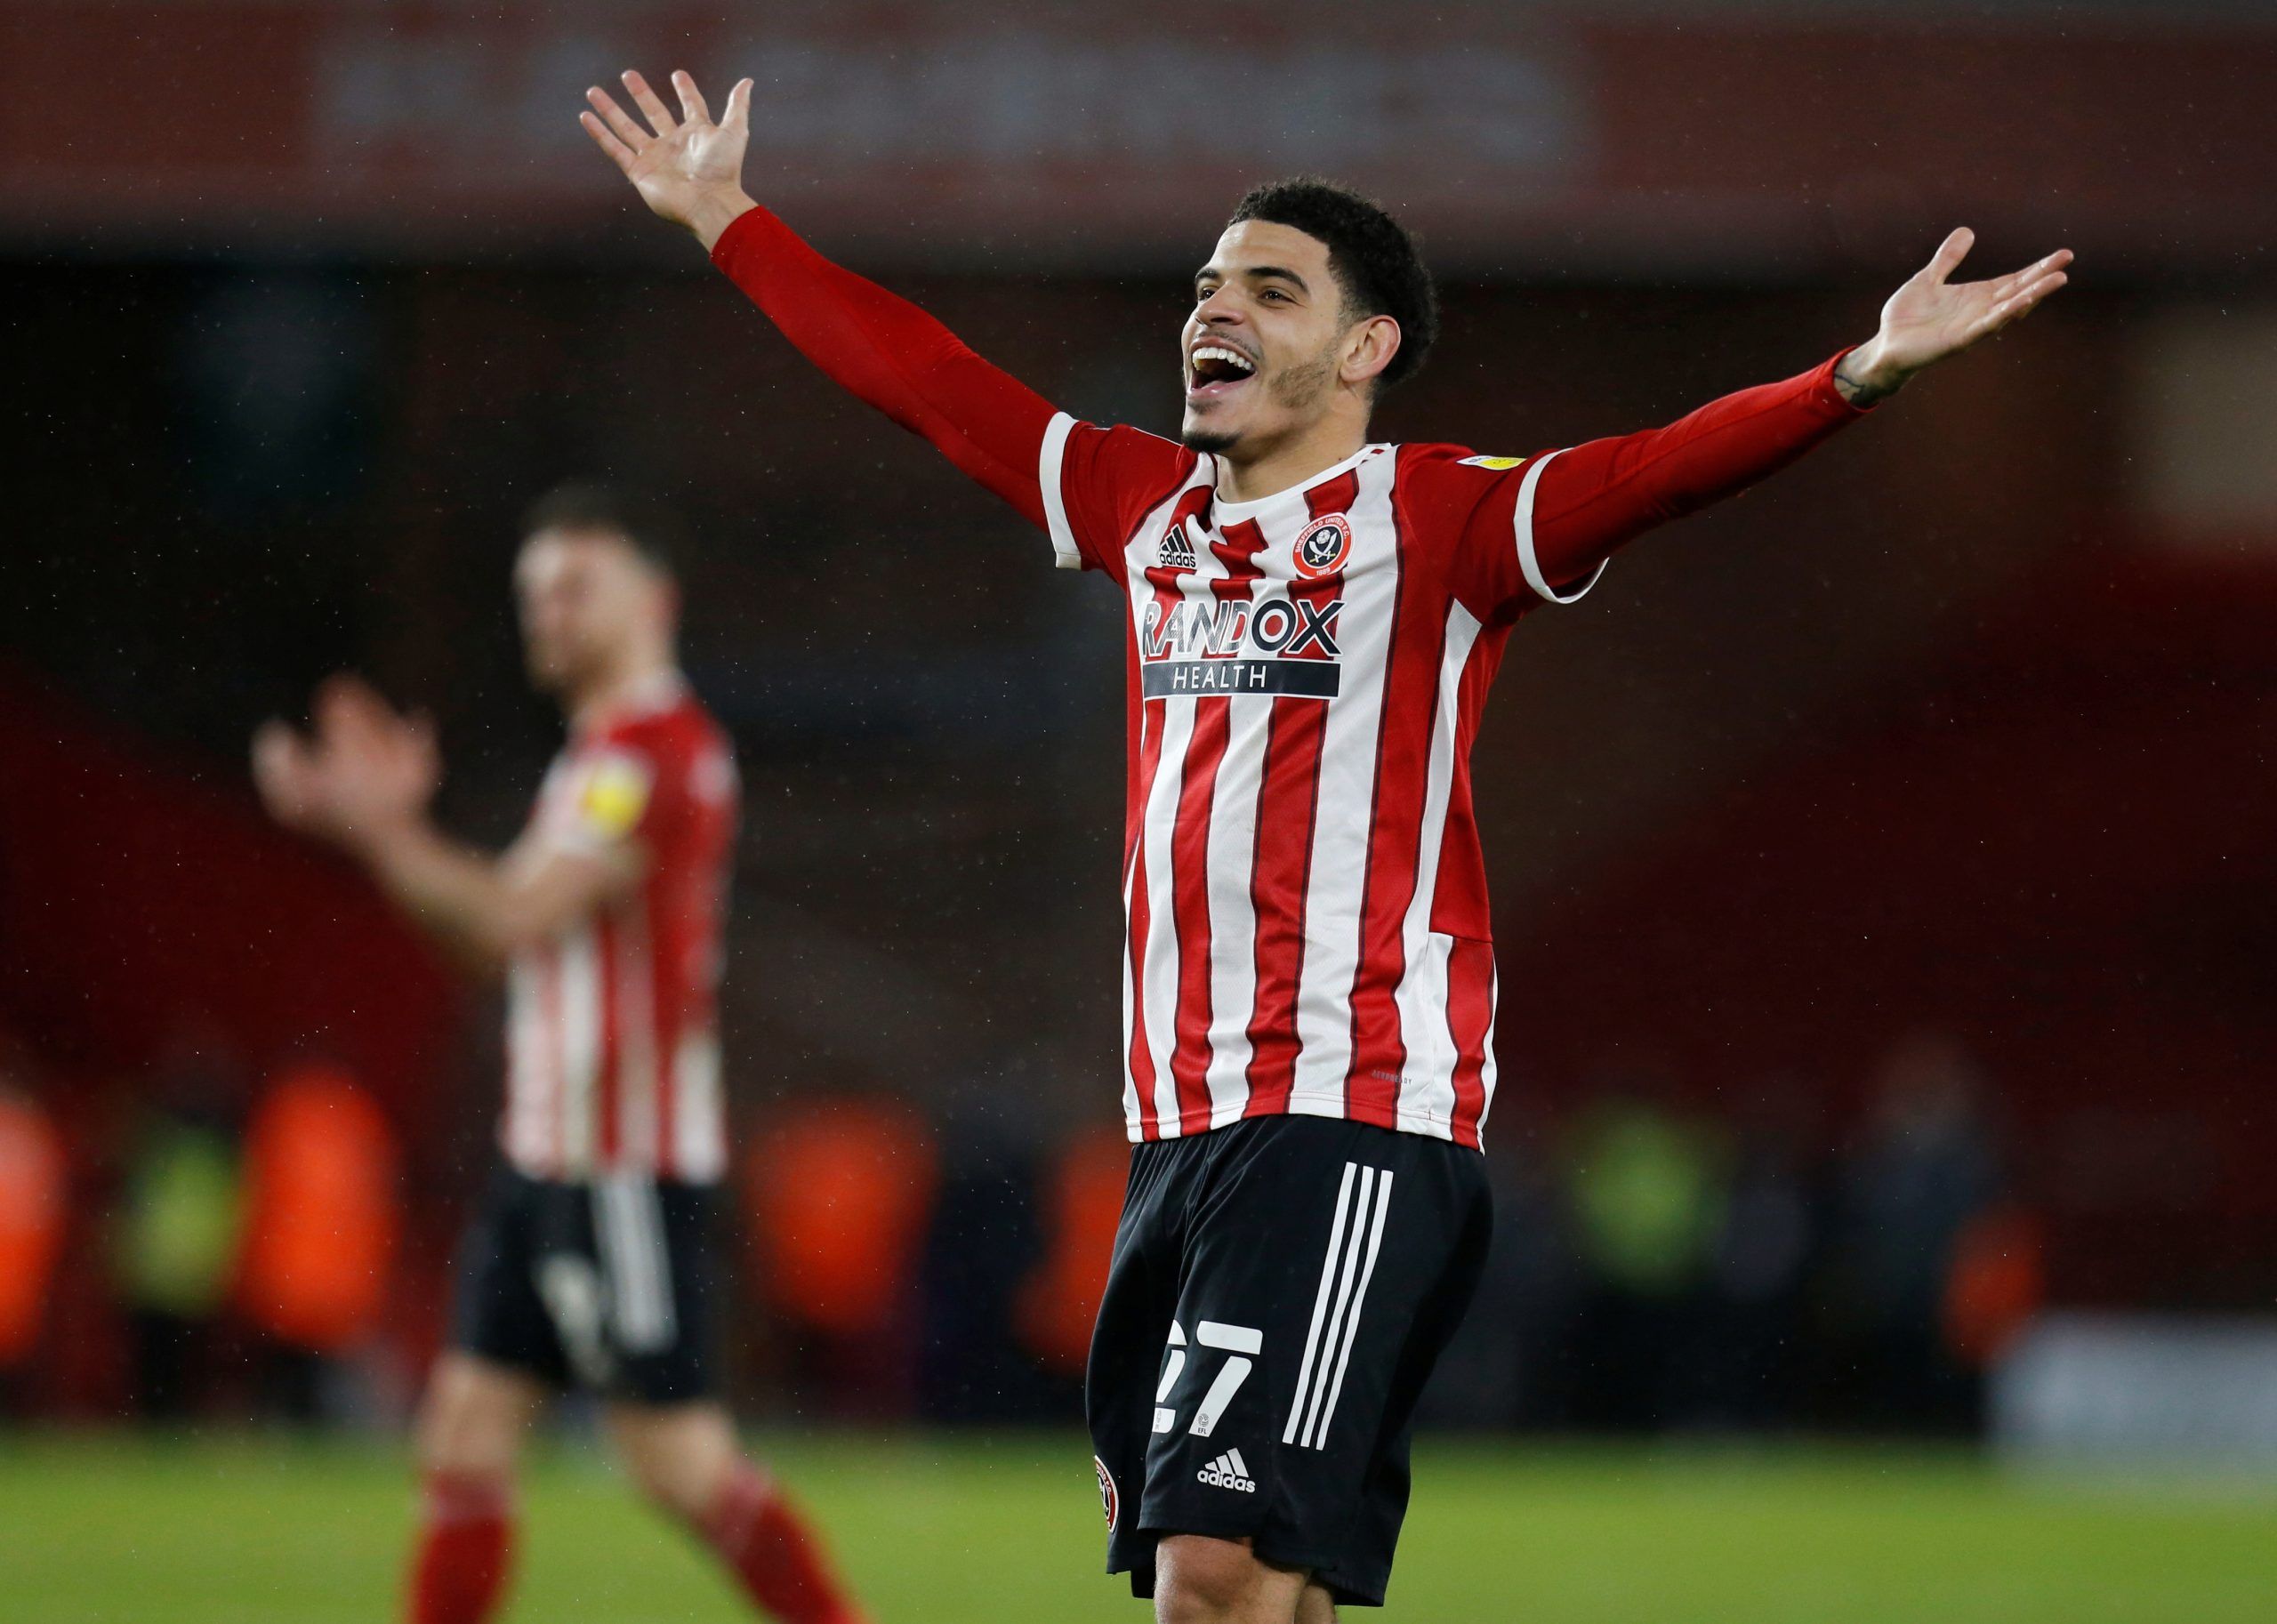 gibbs-white-championship-bruno-lage-transfer-focus-sheffield-united-leander-dendonckerSoccer Football - Championship - Sheffield United v Blackburn Rovers - Bramall Lane, Sheffield, Britain - February 23, 2022  Sheffield United's Morgan Gibbs-White celebrates after the match Action Images/Ed Sykes